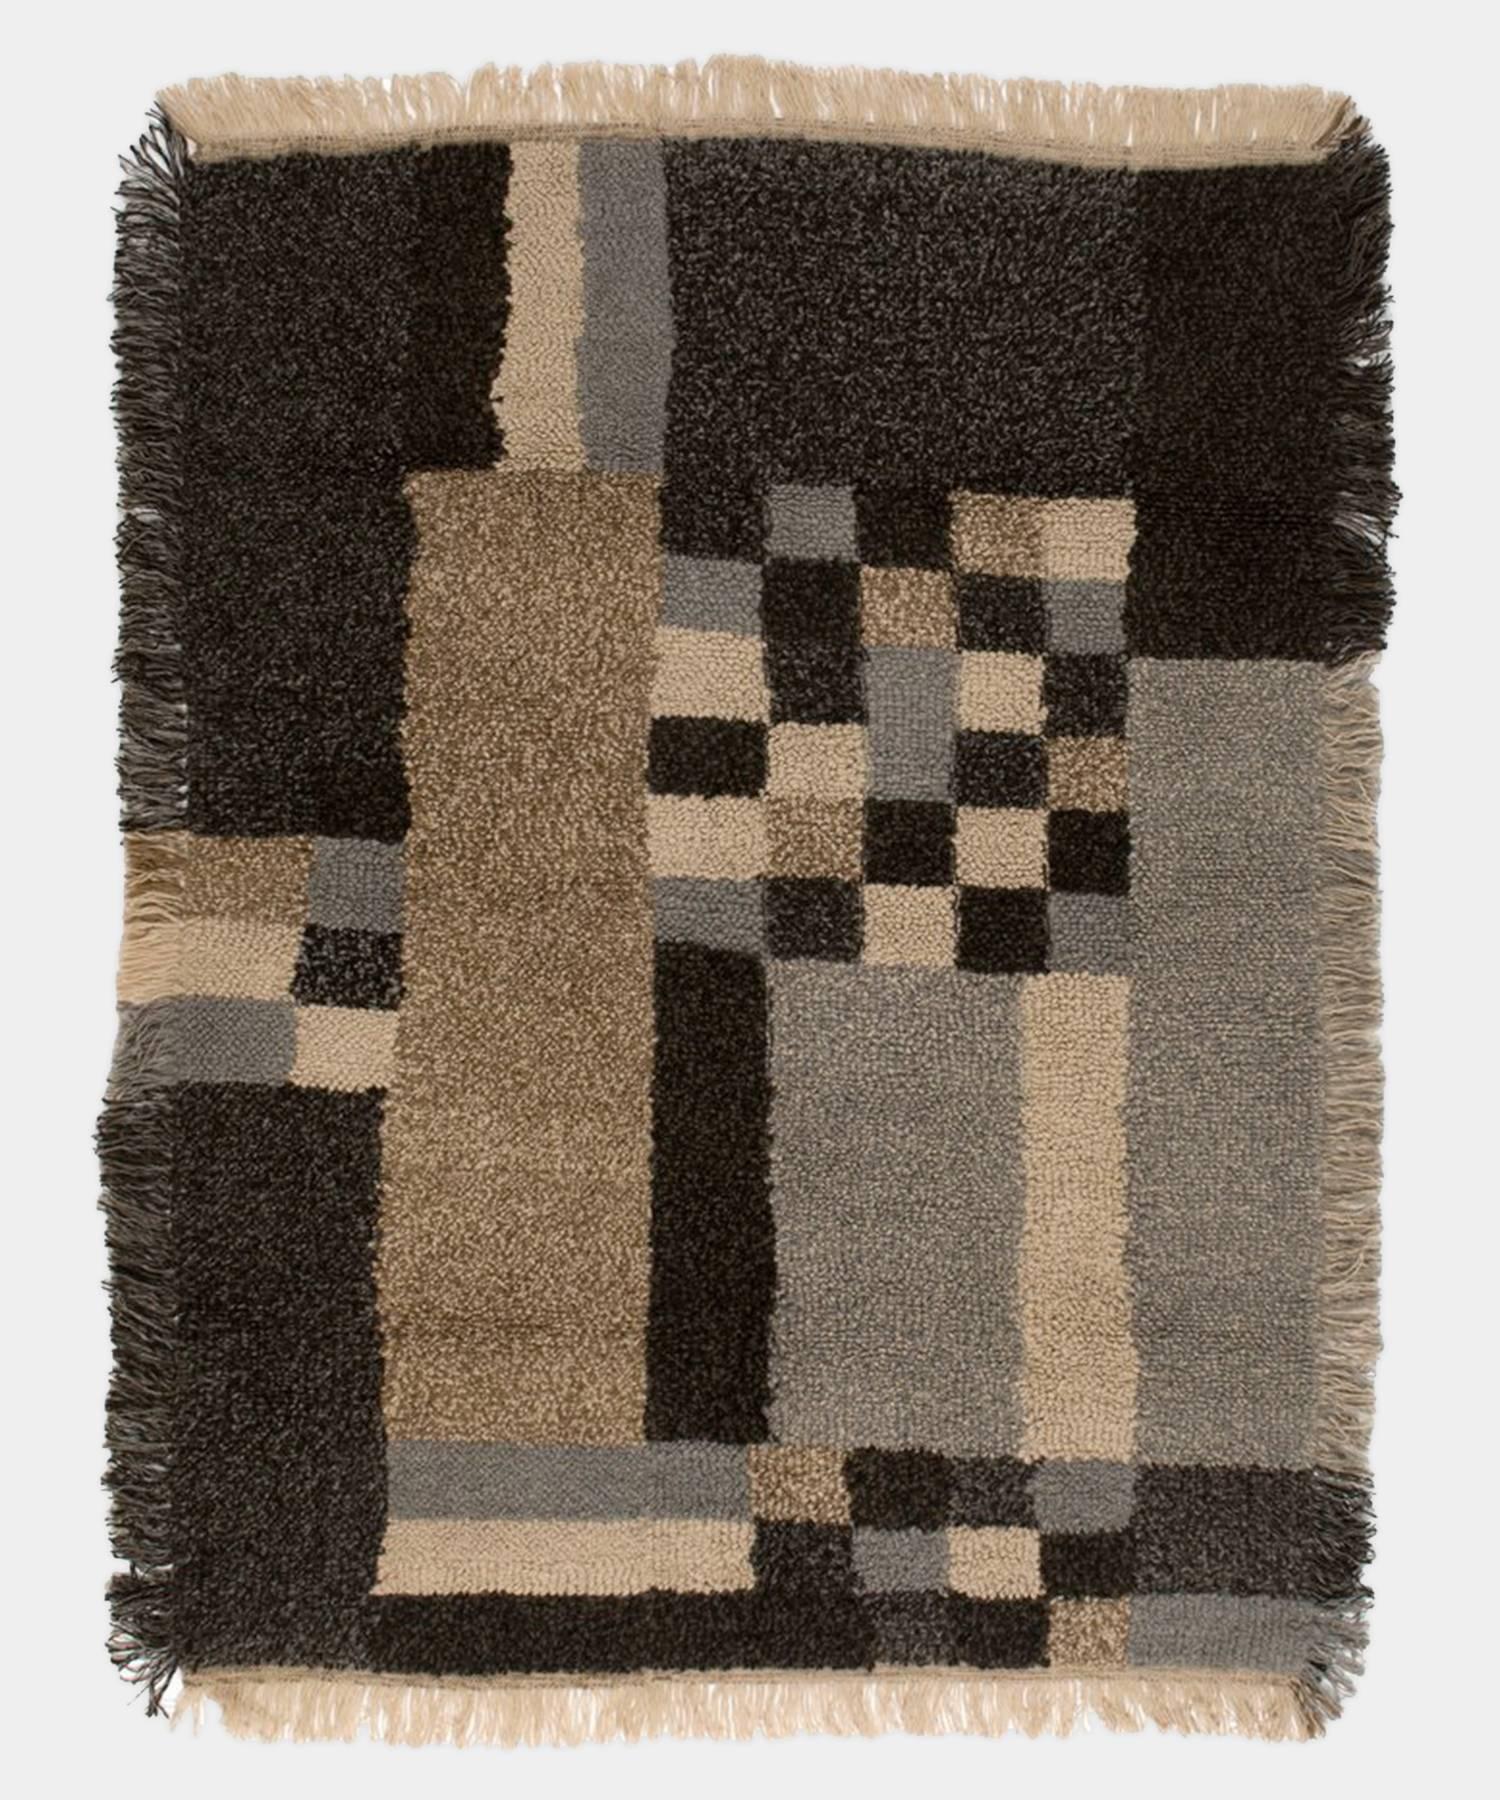 Art Deco Tulu throw by Saved, New York 

Exquisitely textured, heavy-weight throw in earth tones. Available in King and Queen sizes, please inquire for pricing, availability, and lead time.

50% camel hair, 50% yak down

Measures: 52